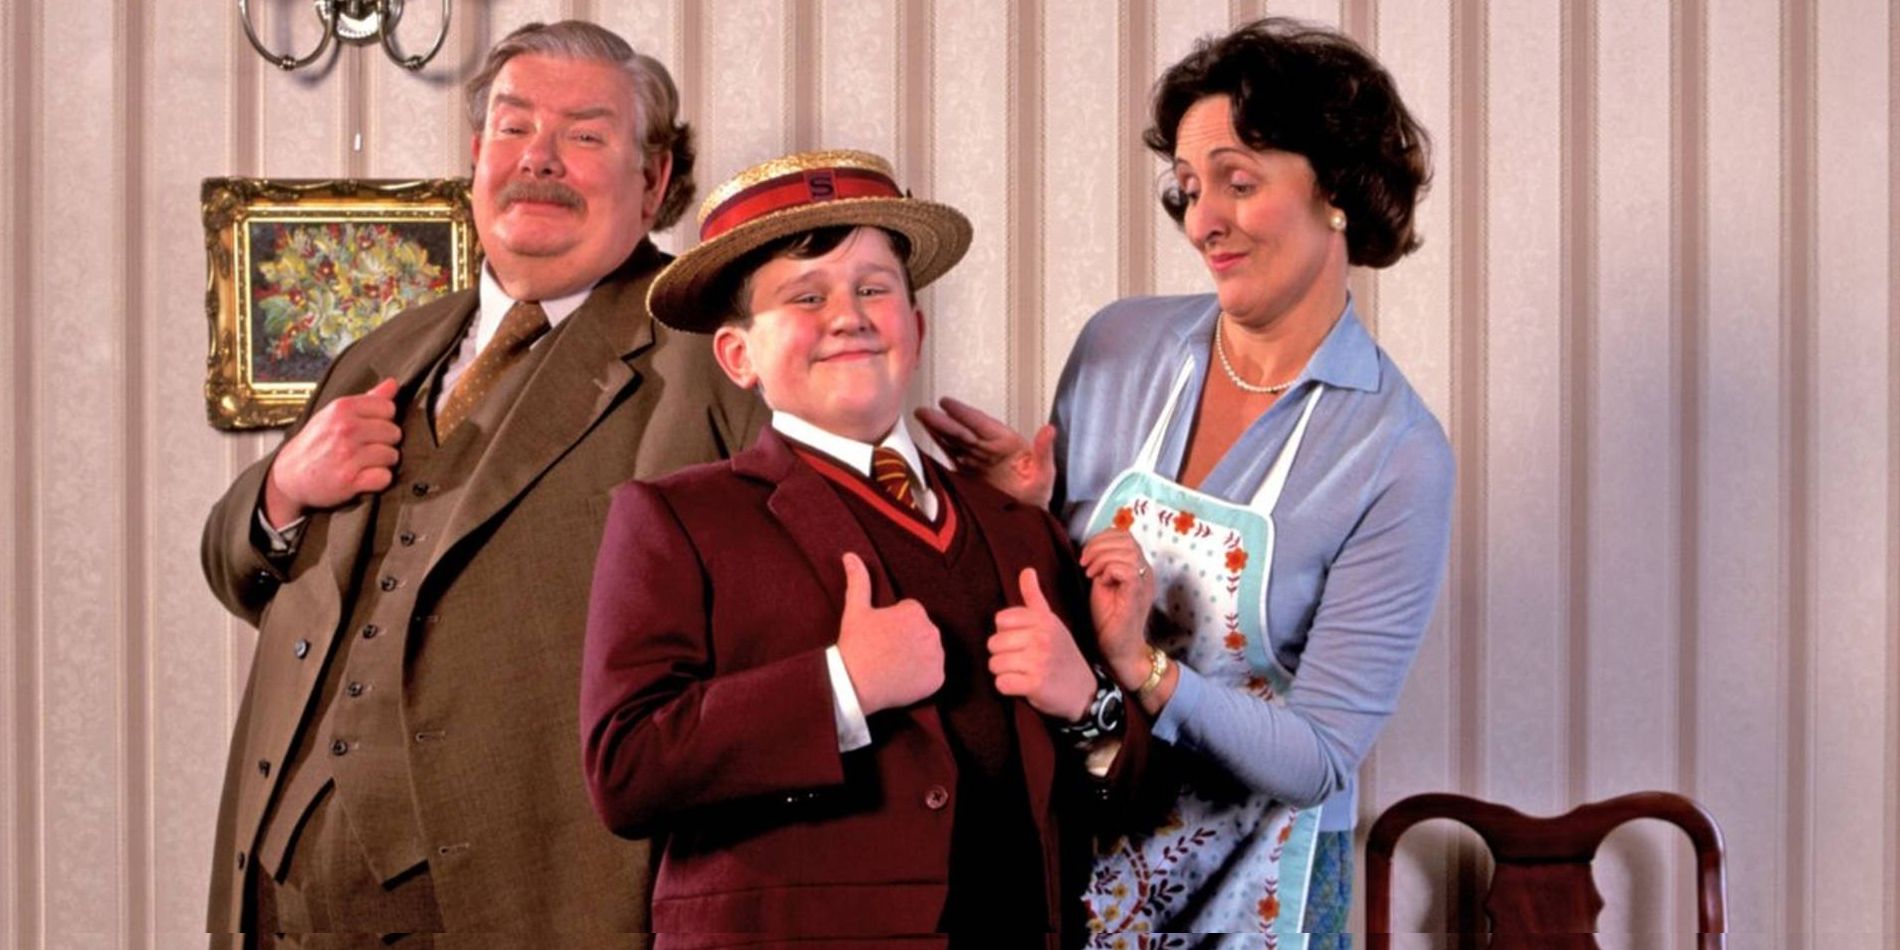 Who do the Dursleys have over for dinner right before the start of Harry’s second year?